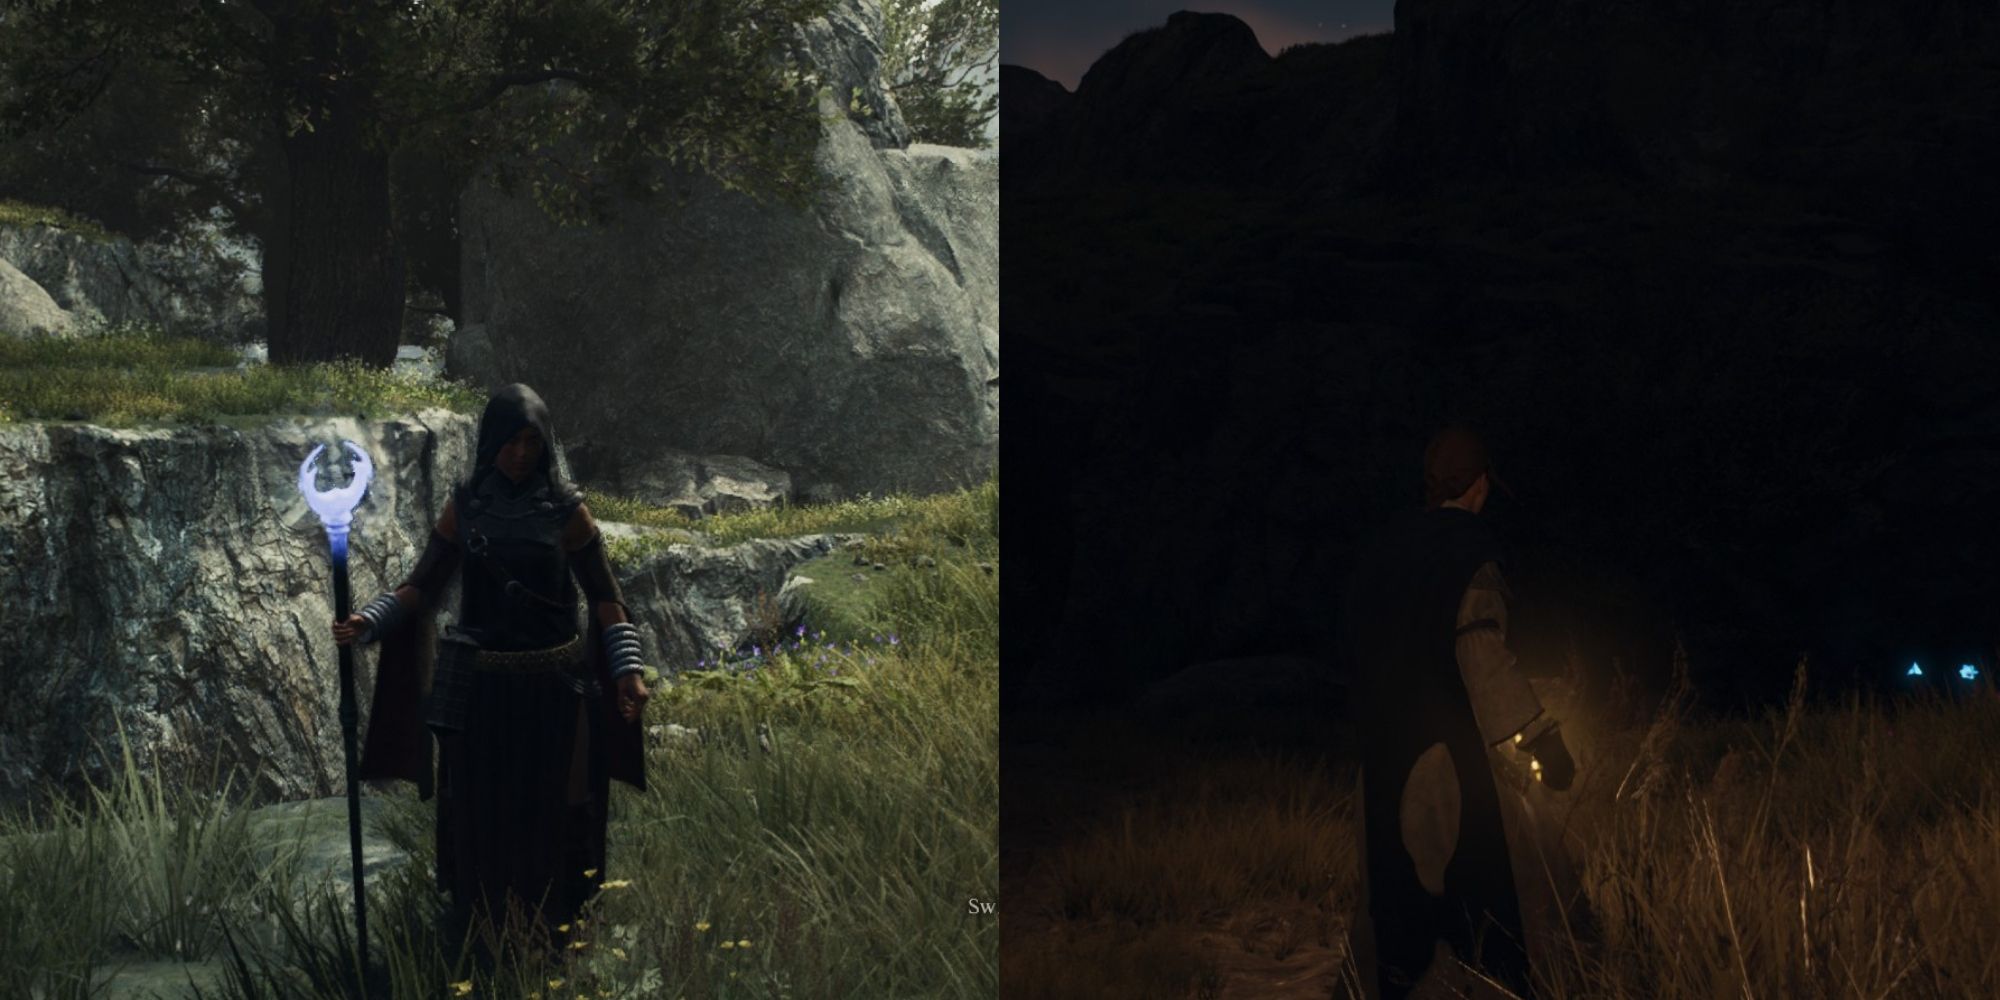 Dragon's Dogma sorcerer during daytime and a mage during nighttime